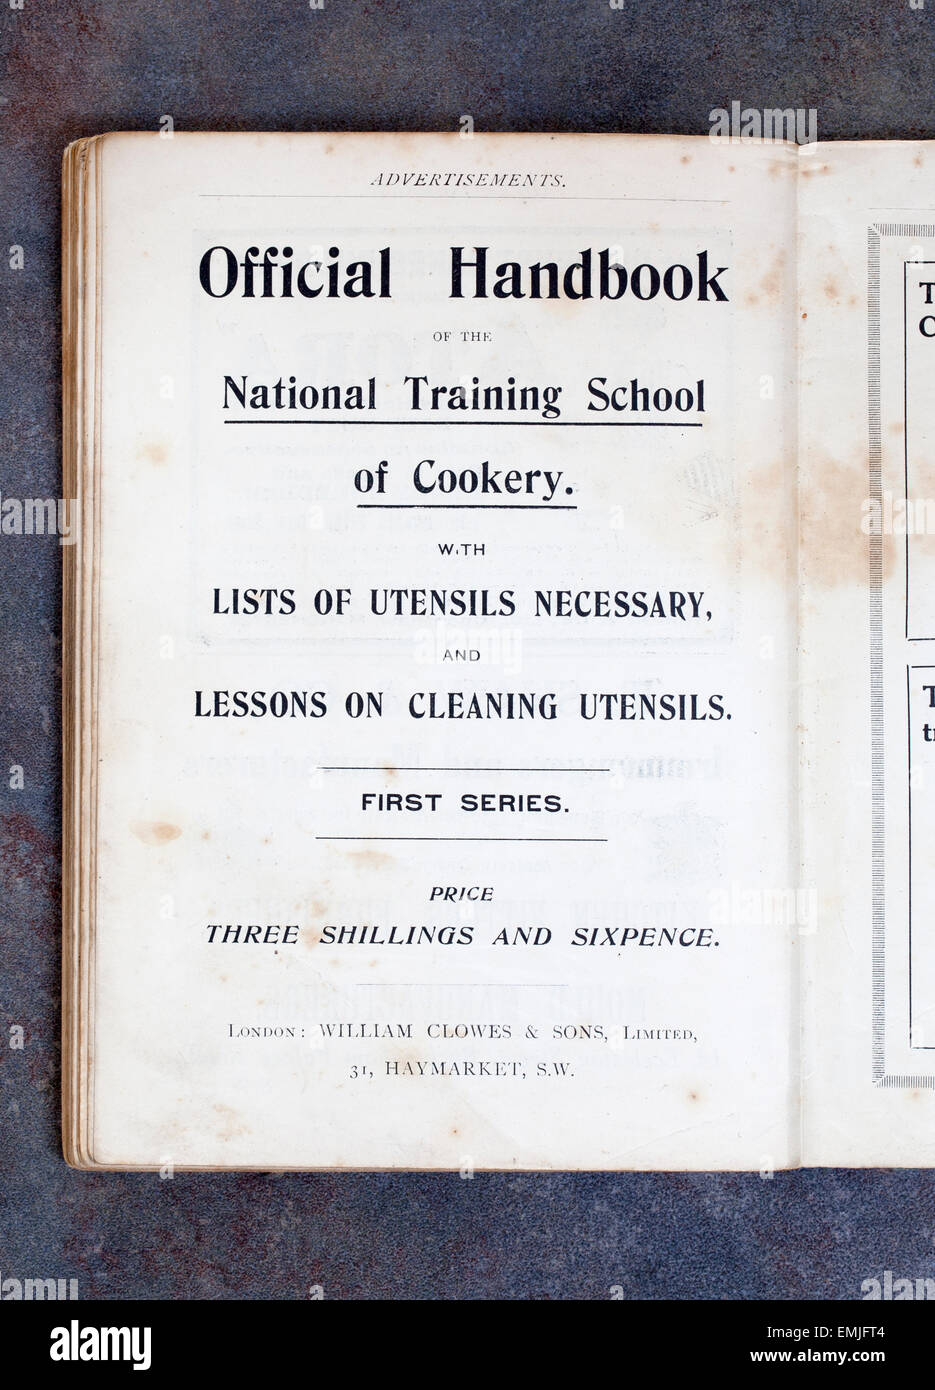 Official Handbook of the National Training Cookery School Stock Photo